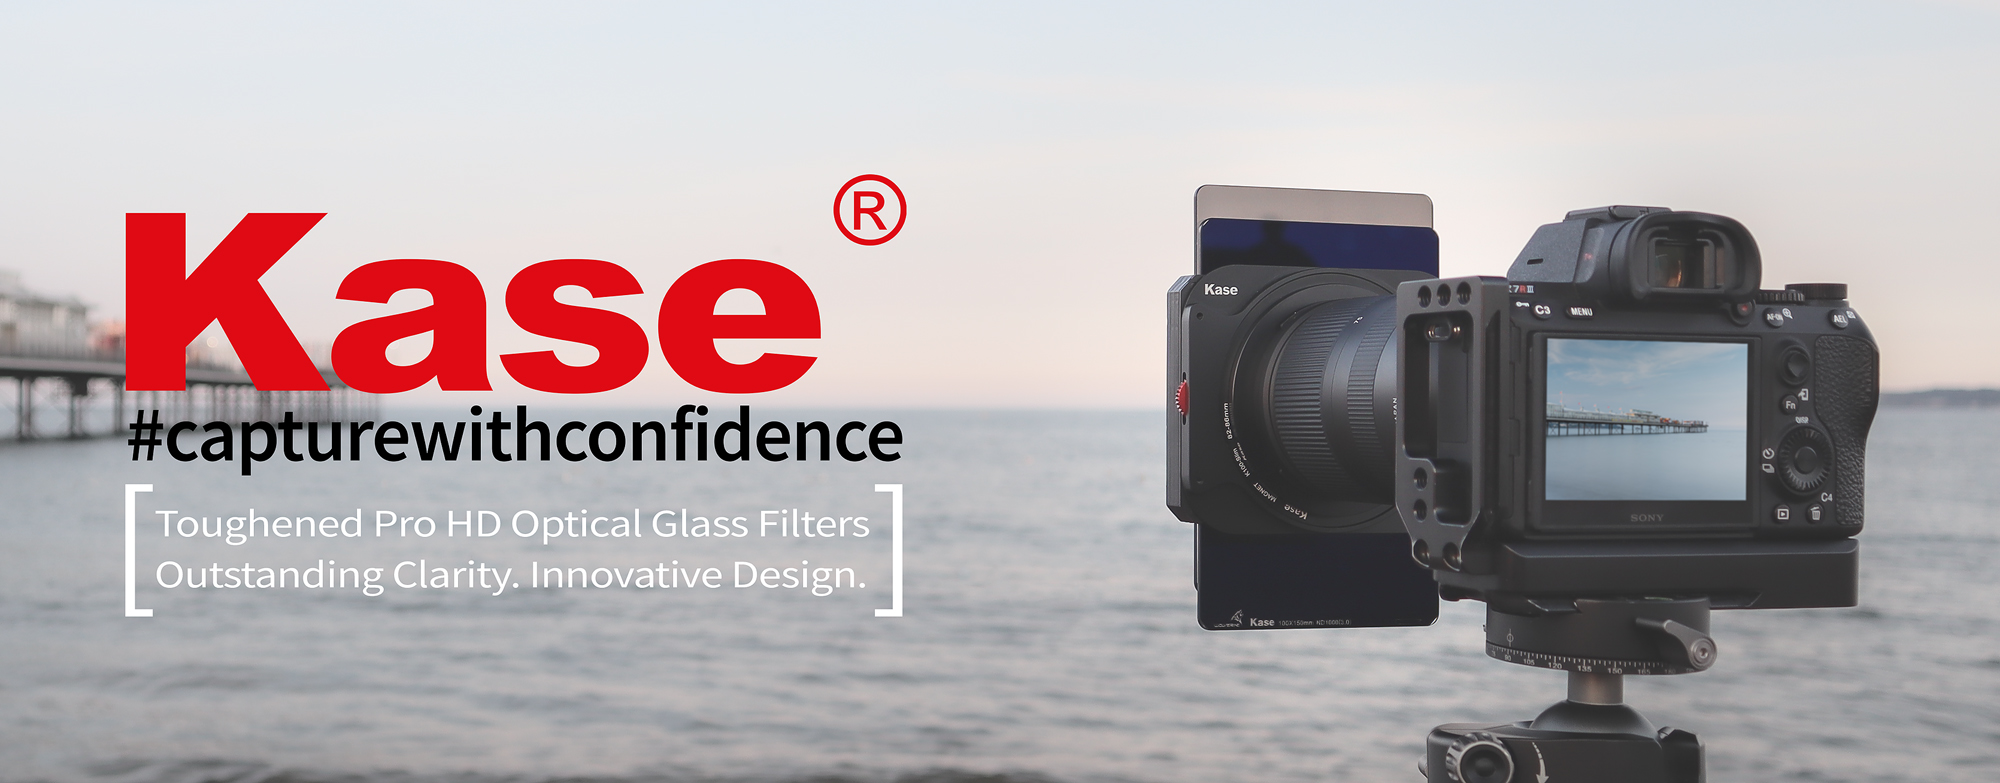 Kase, #capturewithconfidence, Toughened Pro HD Optical Glass Filters Outstanding Clarity. Innovative Design.